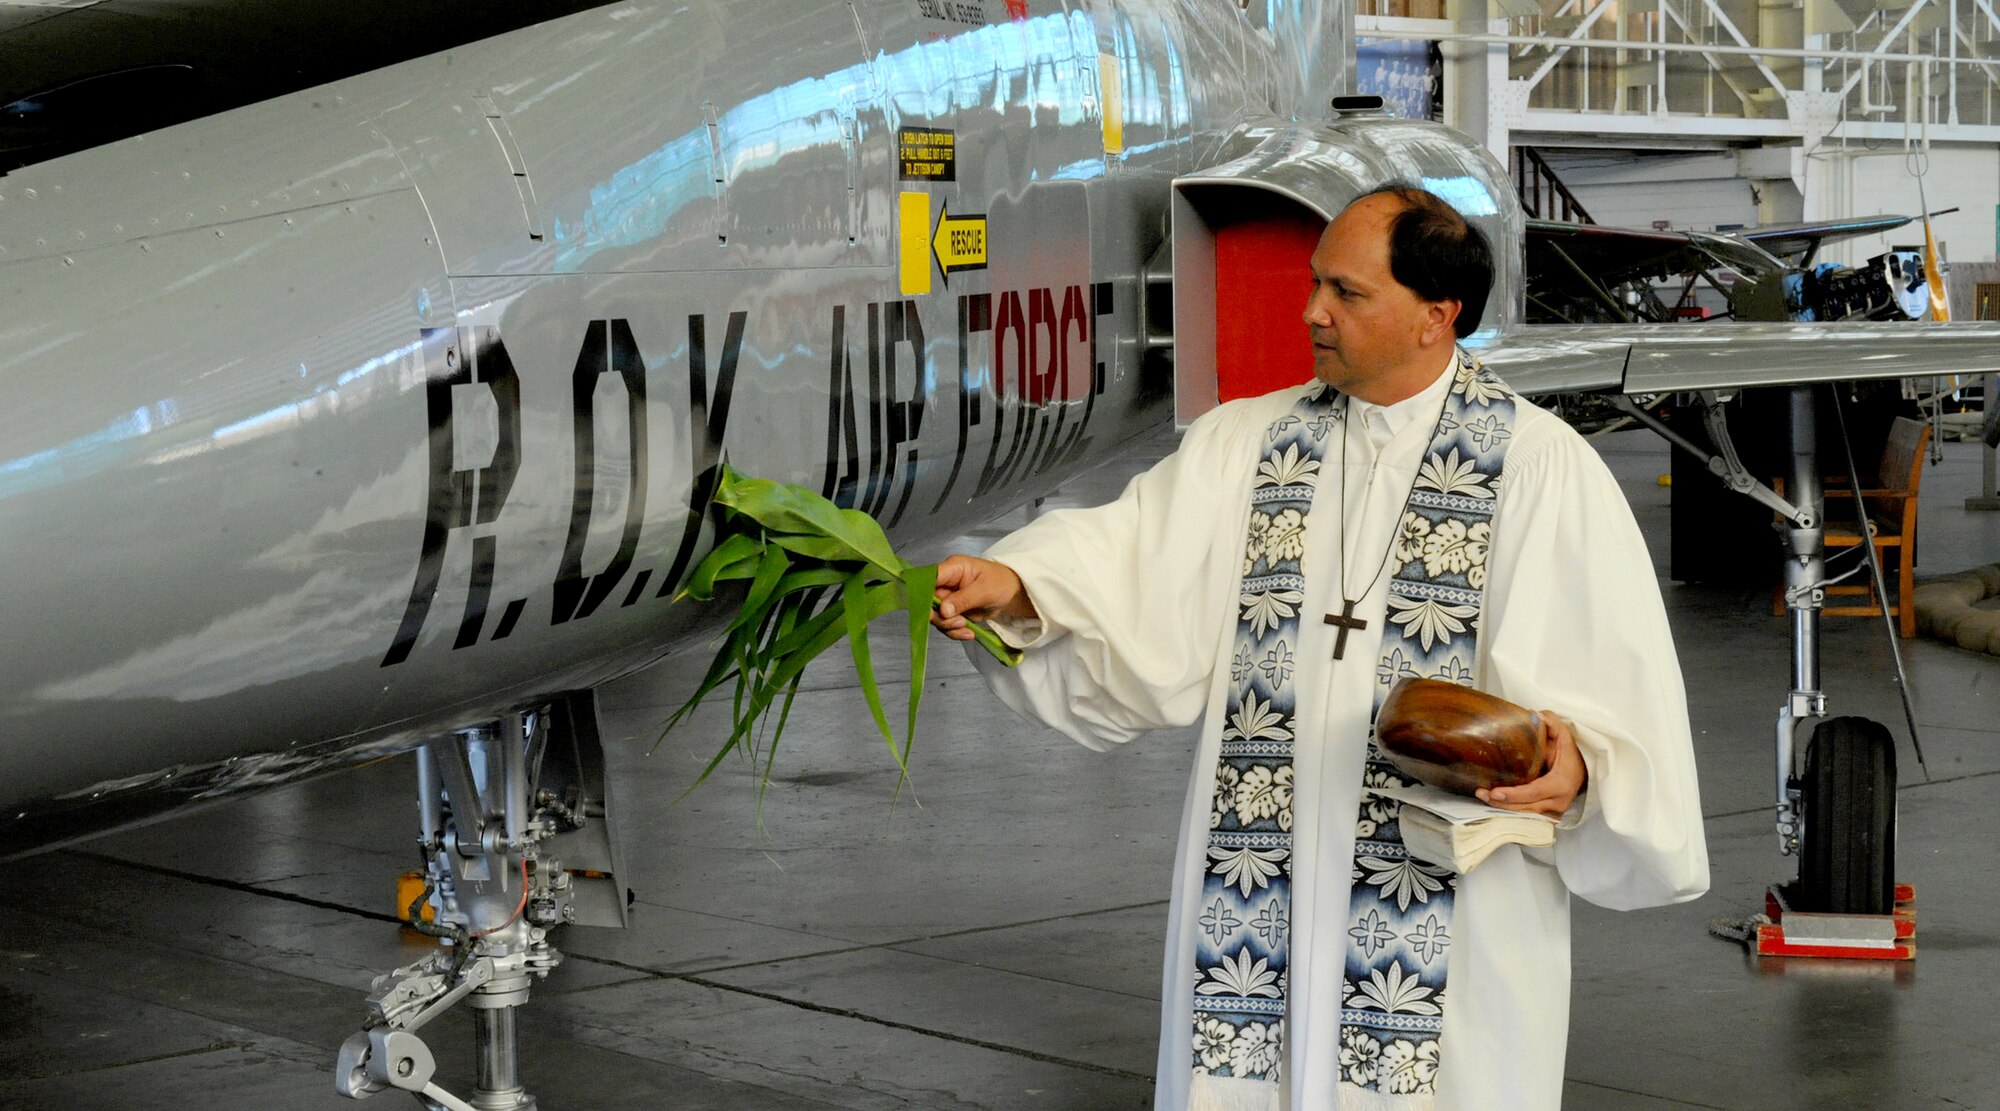 Kahu Kordell Kekoa blesses a Republic of Korea Air Force F-5A Freedom Fighter with ti leaves and Hawaiian water during the F-5A dedication ceremony at the Pacific Aviation Museum, Hawaii, Nov. 12, 2012. The aircraft was dedicated to Gen. Kim Too Man, a legendary figure in the ROKAF. This aircraft honors the rich airpower of the Pacific, and serves as a reminder that ROKAF and American Airmen have served side by side for over 60 years. (U.S. Air Force photo/Tech Sgt. Jerome S. Tayborn/Released) 